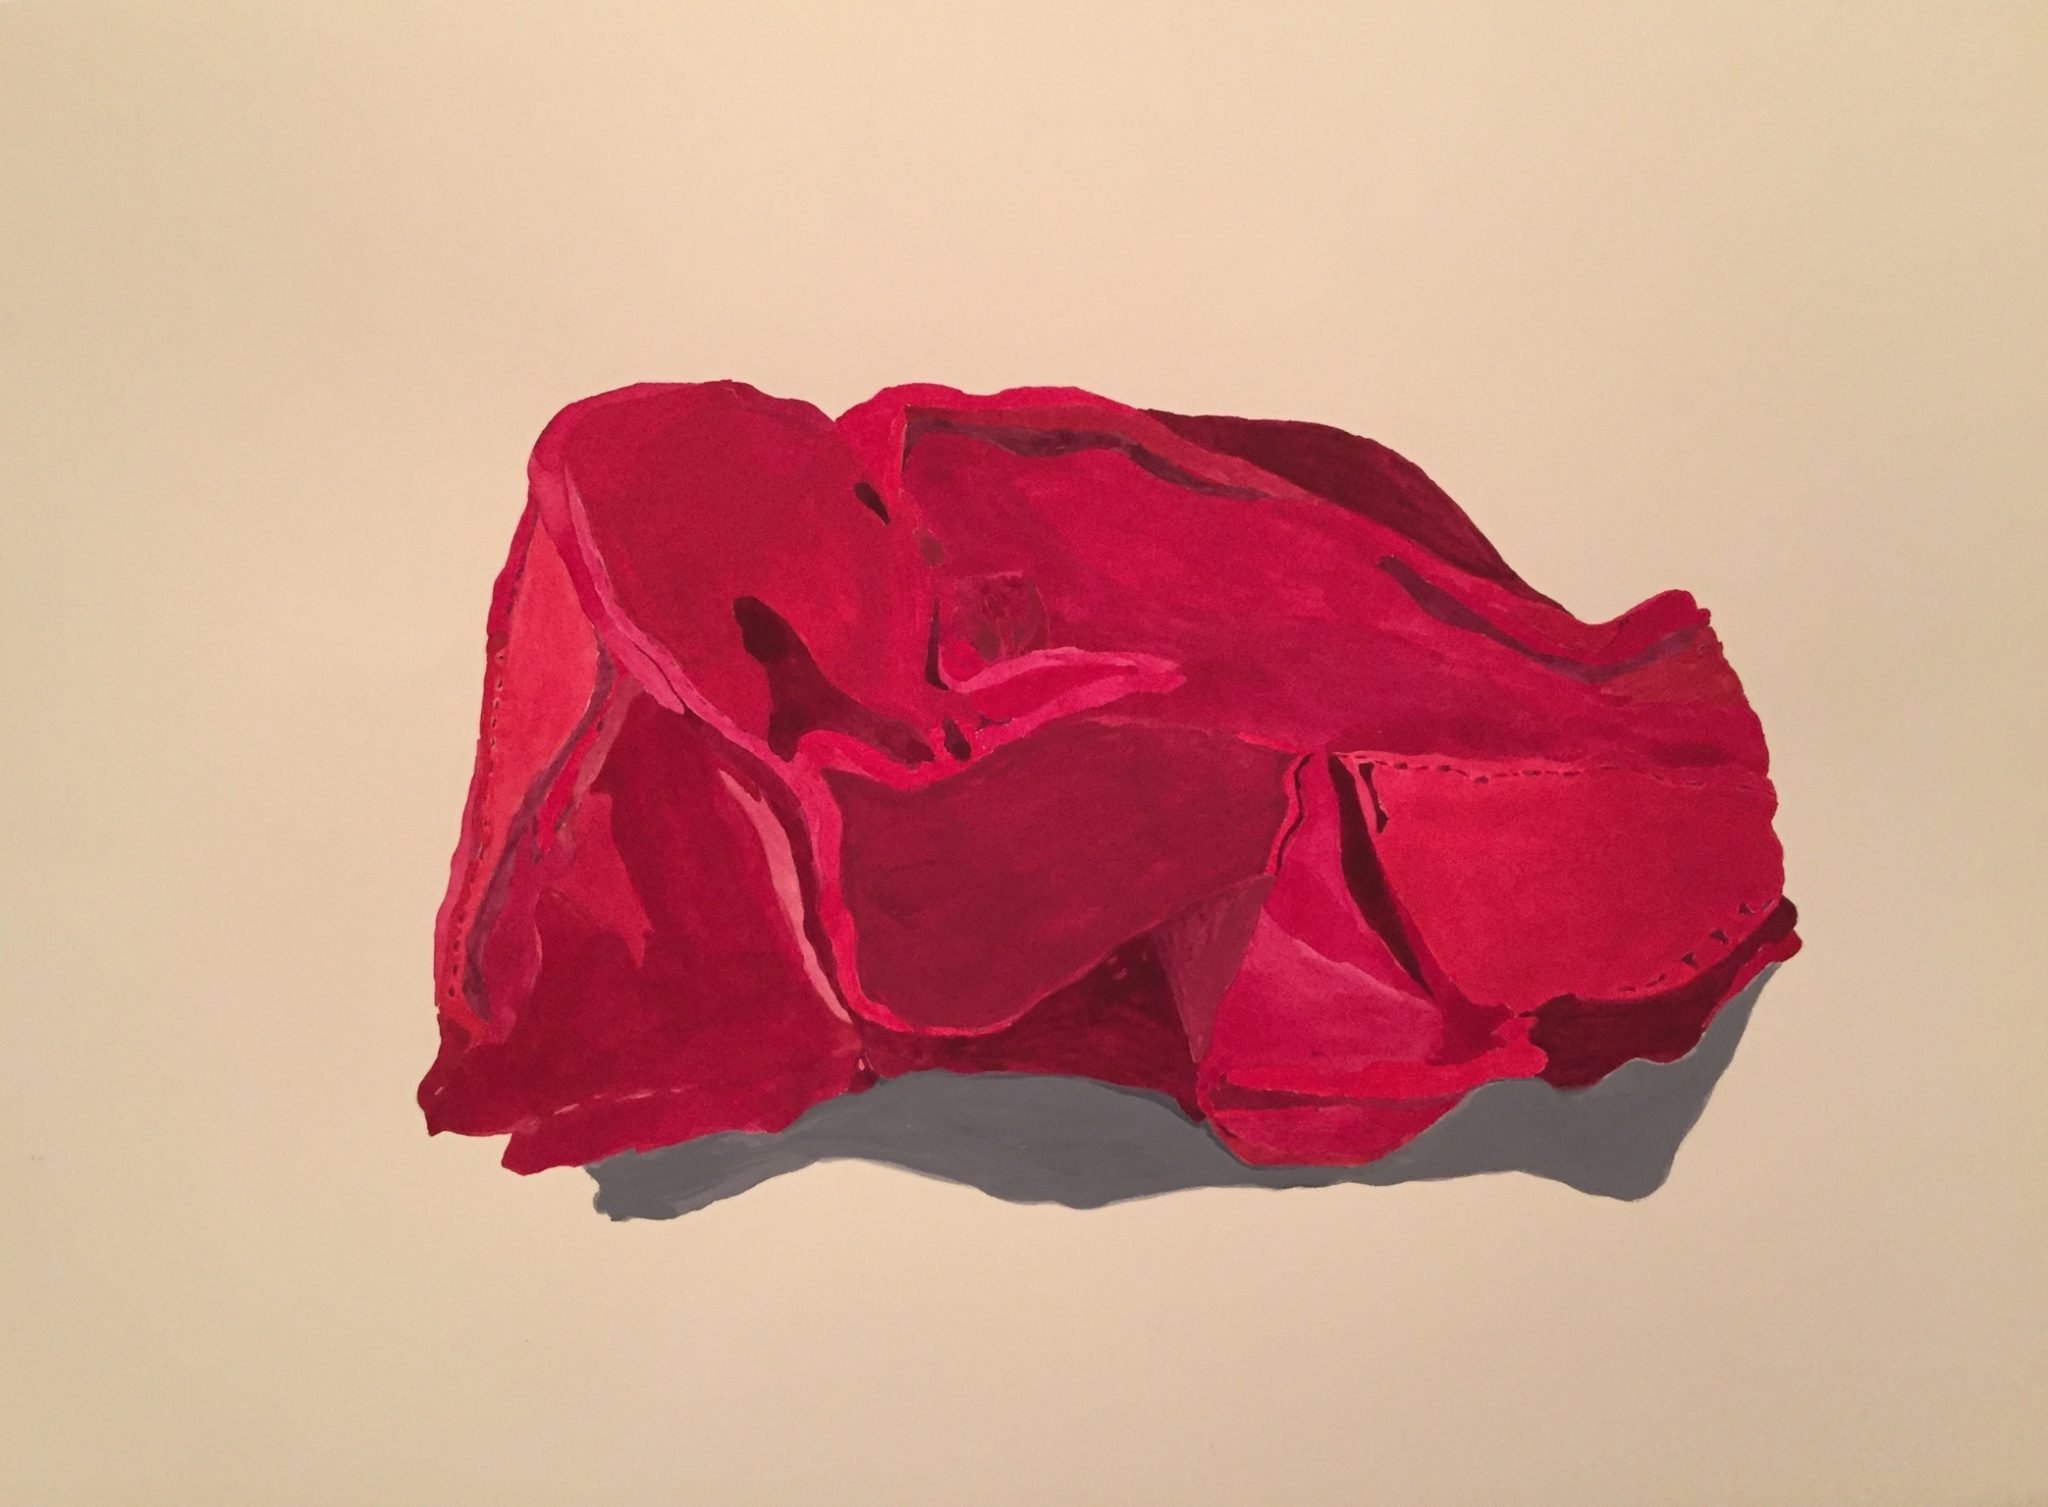 Candace Briceno-Connolly, Rock (“Red”), Pencil & gouache on paper, 11"x 14"